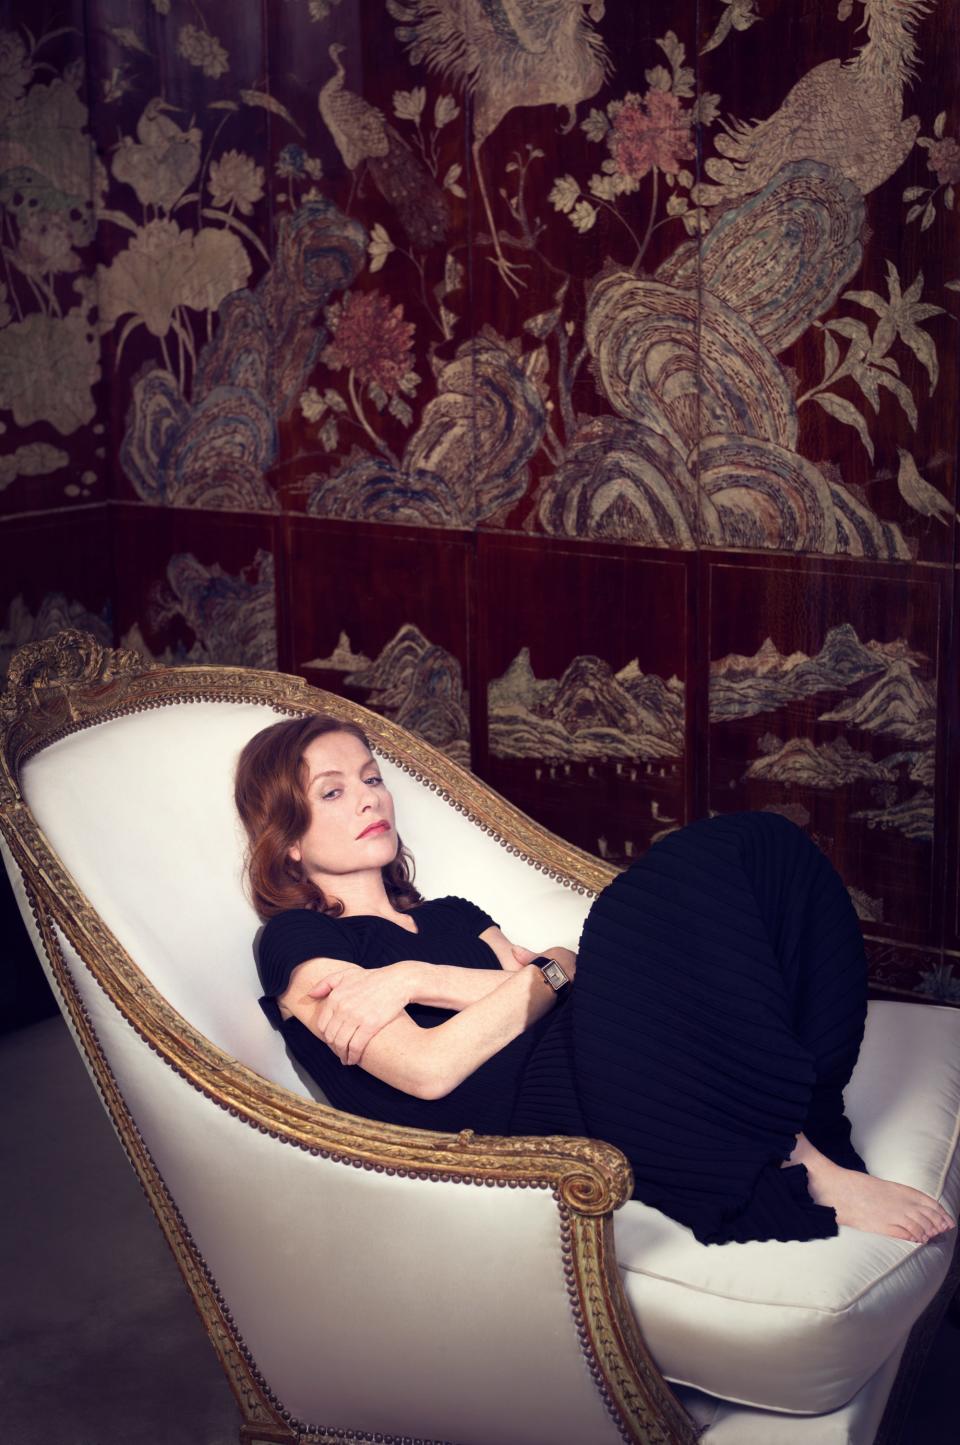 Photographed by Rene & Radka at the Chanel apartment, Paris, wearing the Chanel Boyfriend in 18-carat beige gold and diamonds